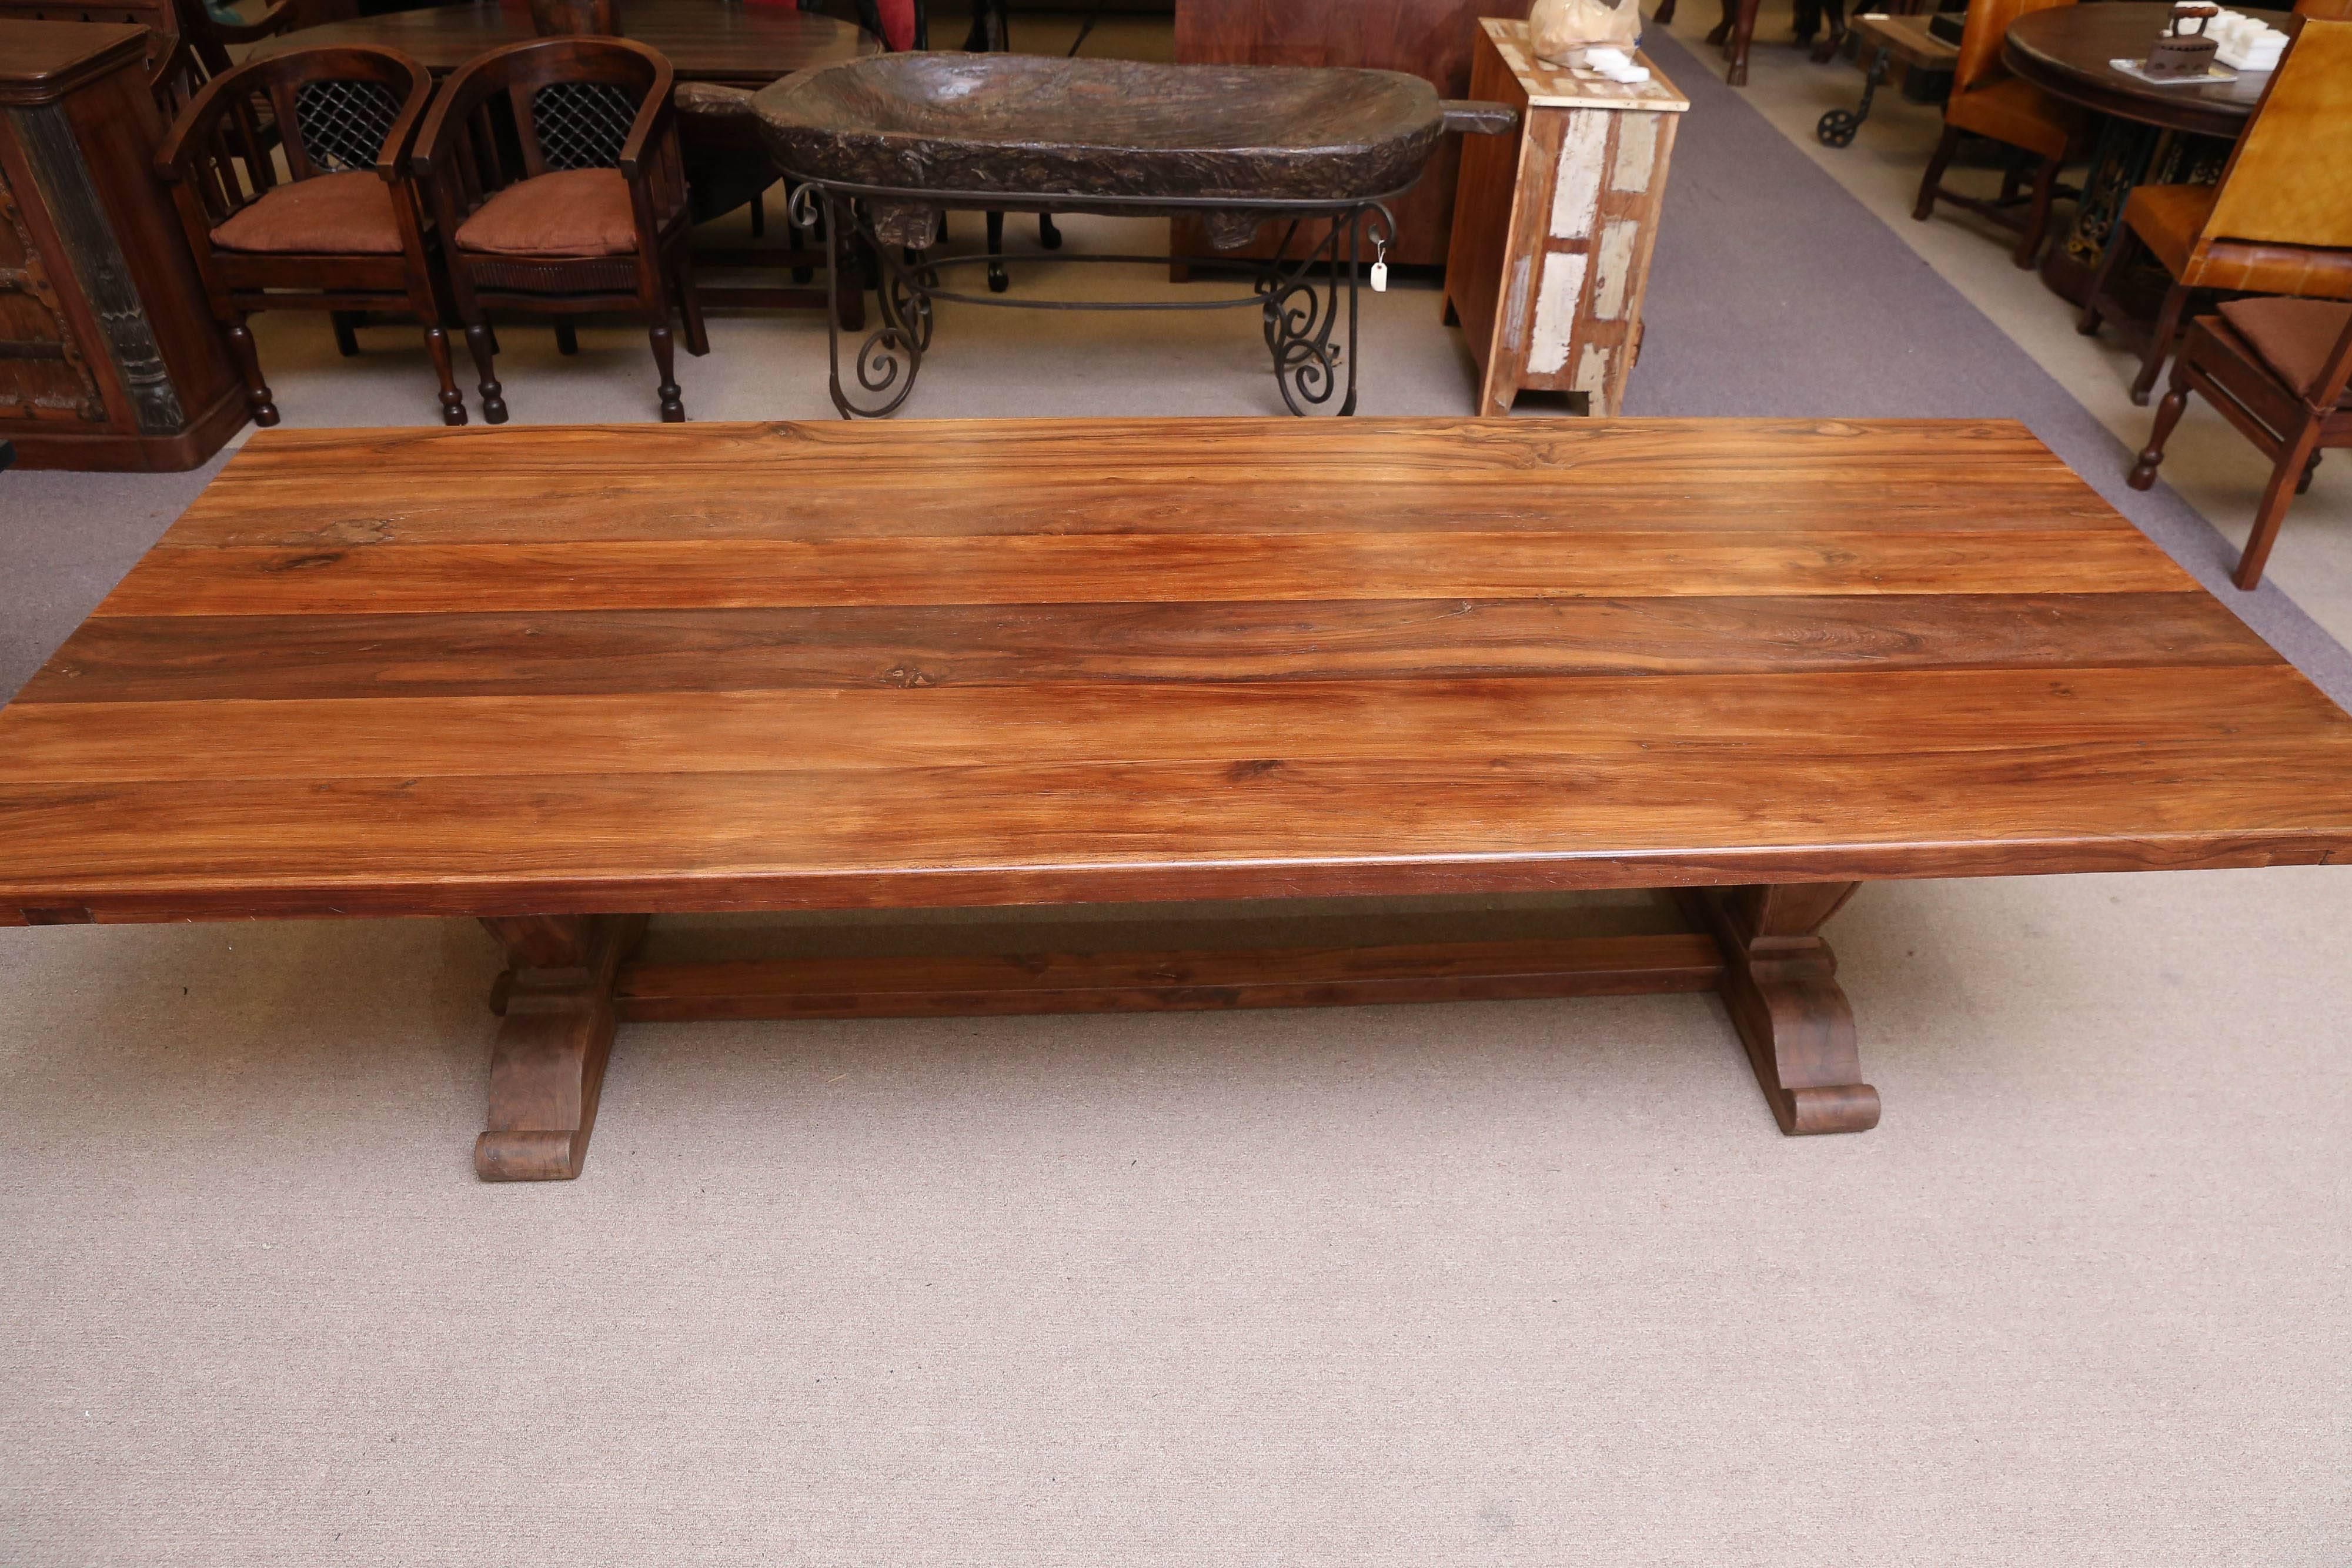 Teak wood slab of 2.3 inch was used all through for the top. Made in an era of wealth, economizing of wood or anything else was not on their plan. Though heavily made the table looks light and airy. The top is supported on each end by massive shaped